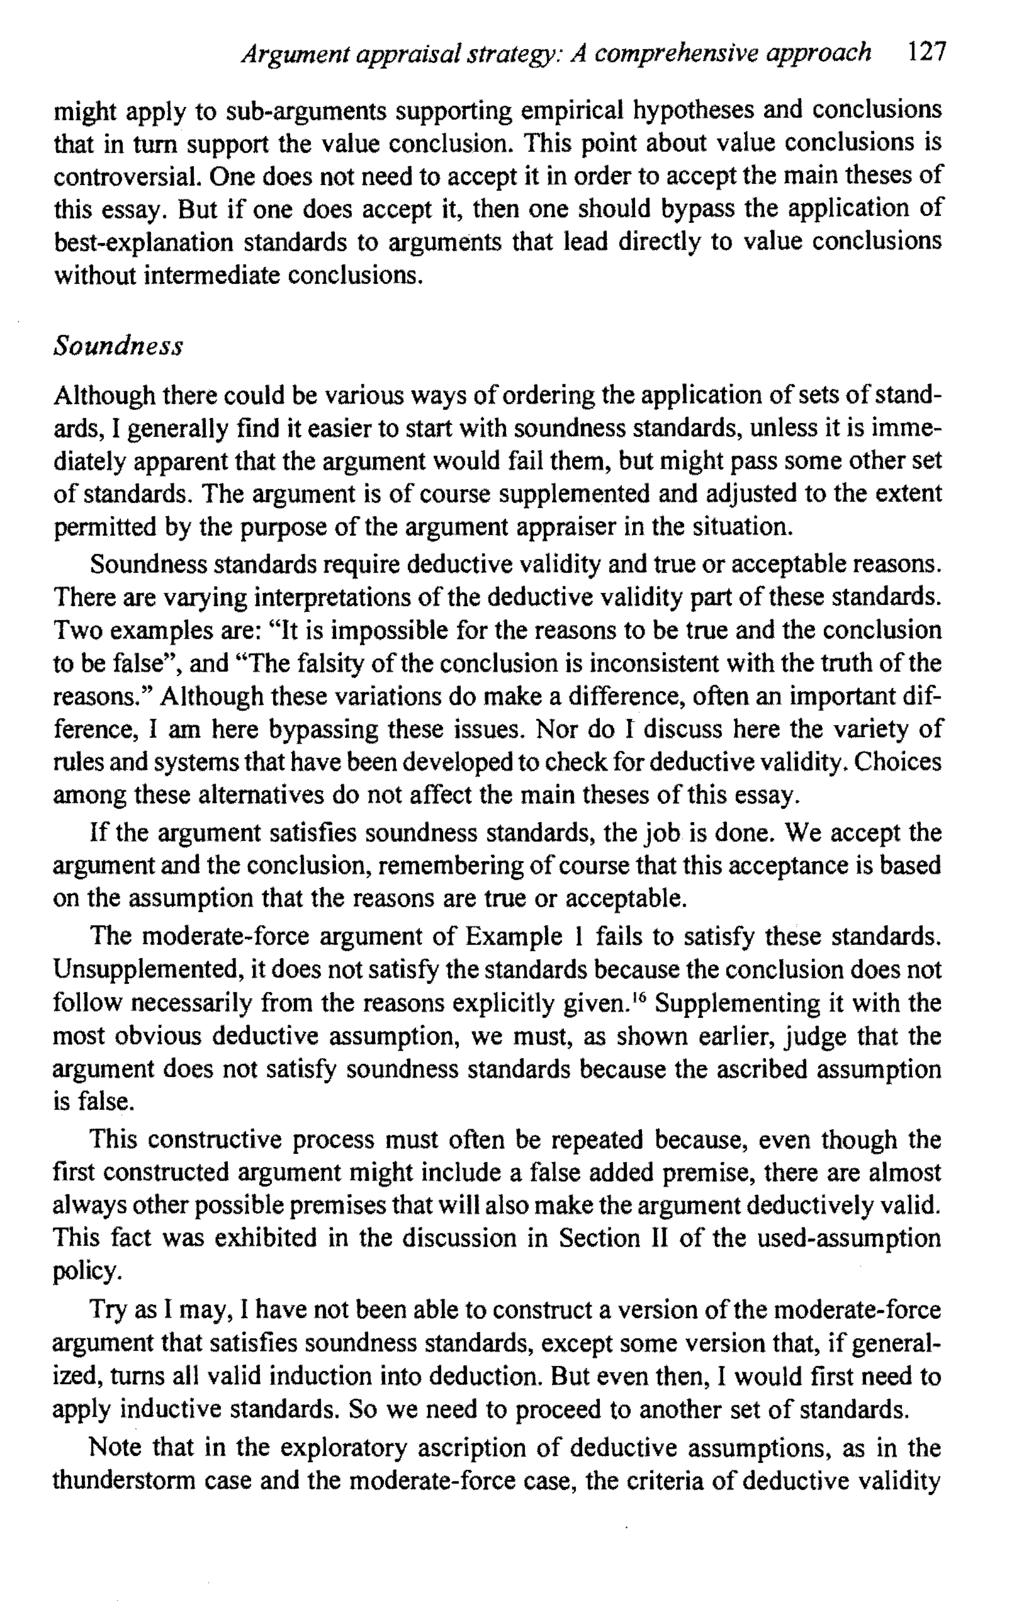 Argument appraisal strategy: A comprehensive approach 127 might apply to sub-arguments supporting empirical hypotheses and conclusions that in turn support the value conclusion.